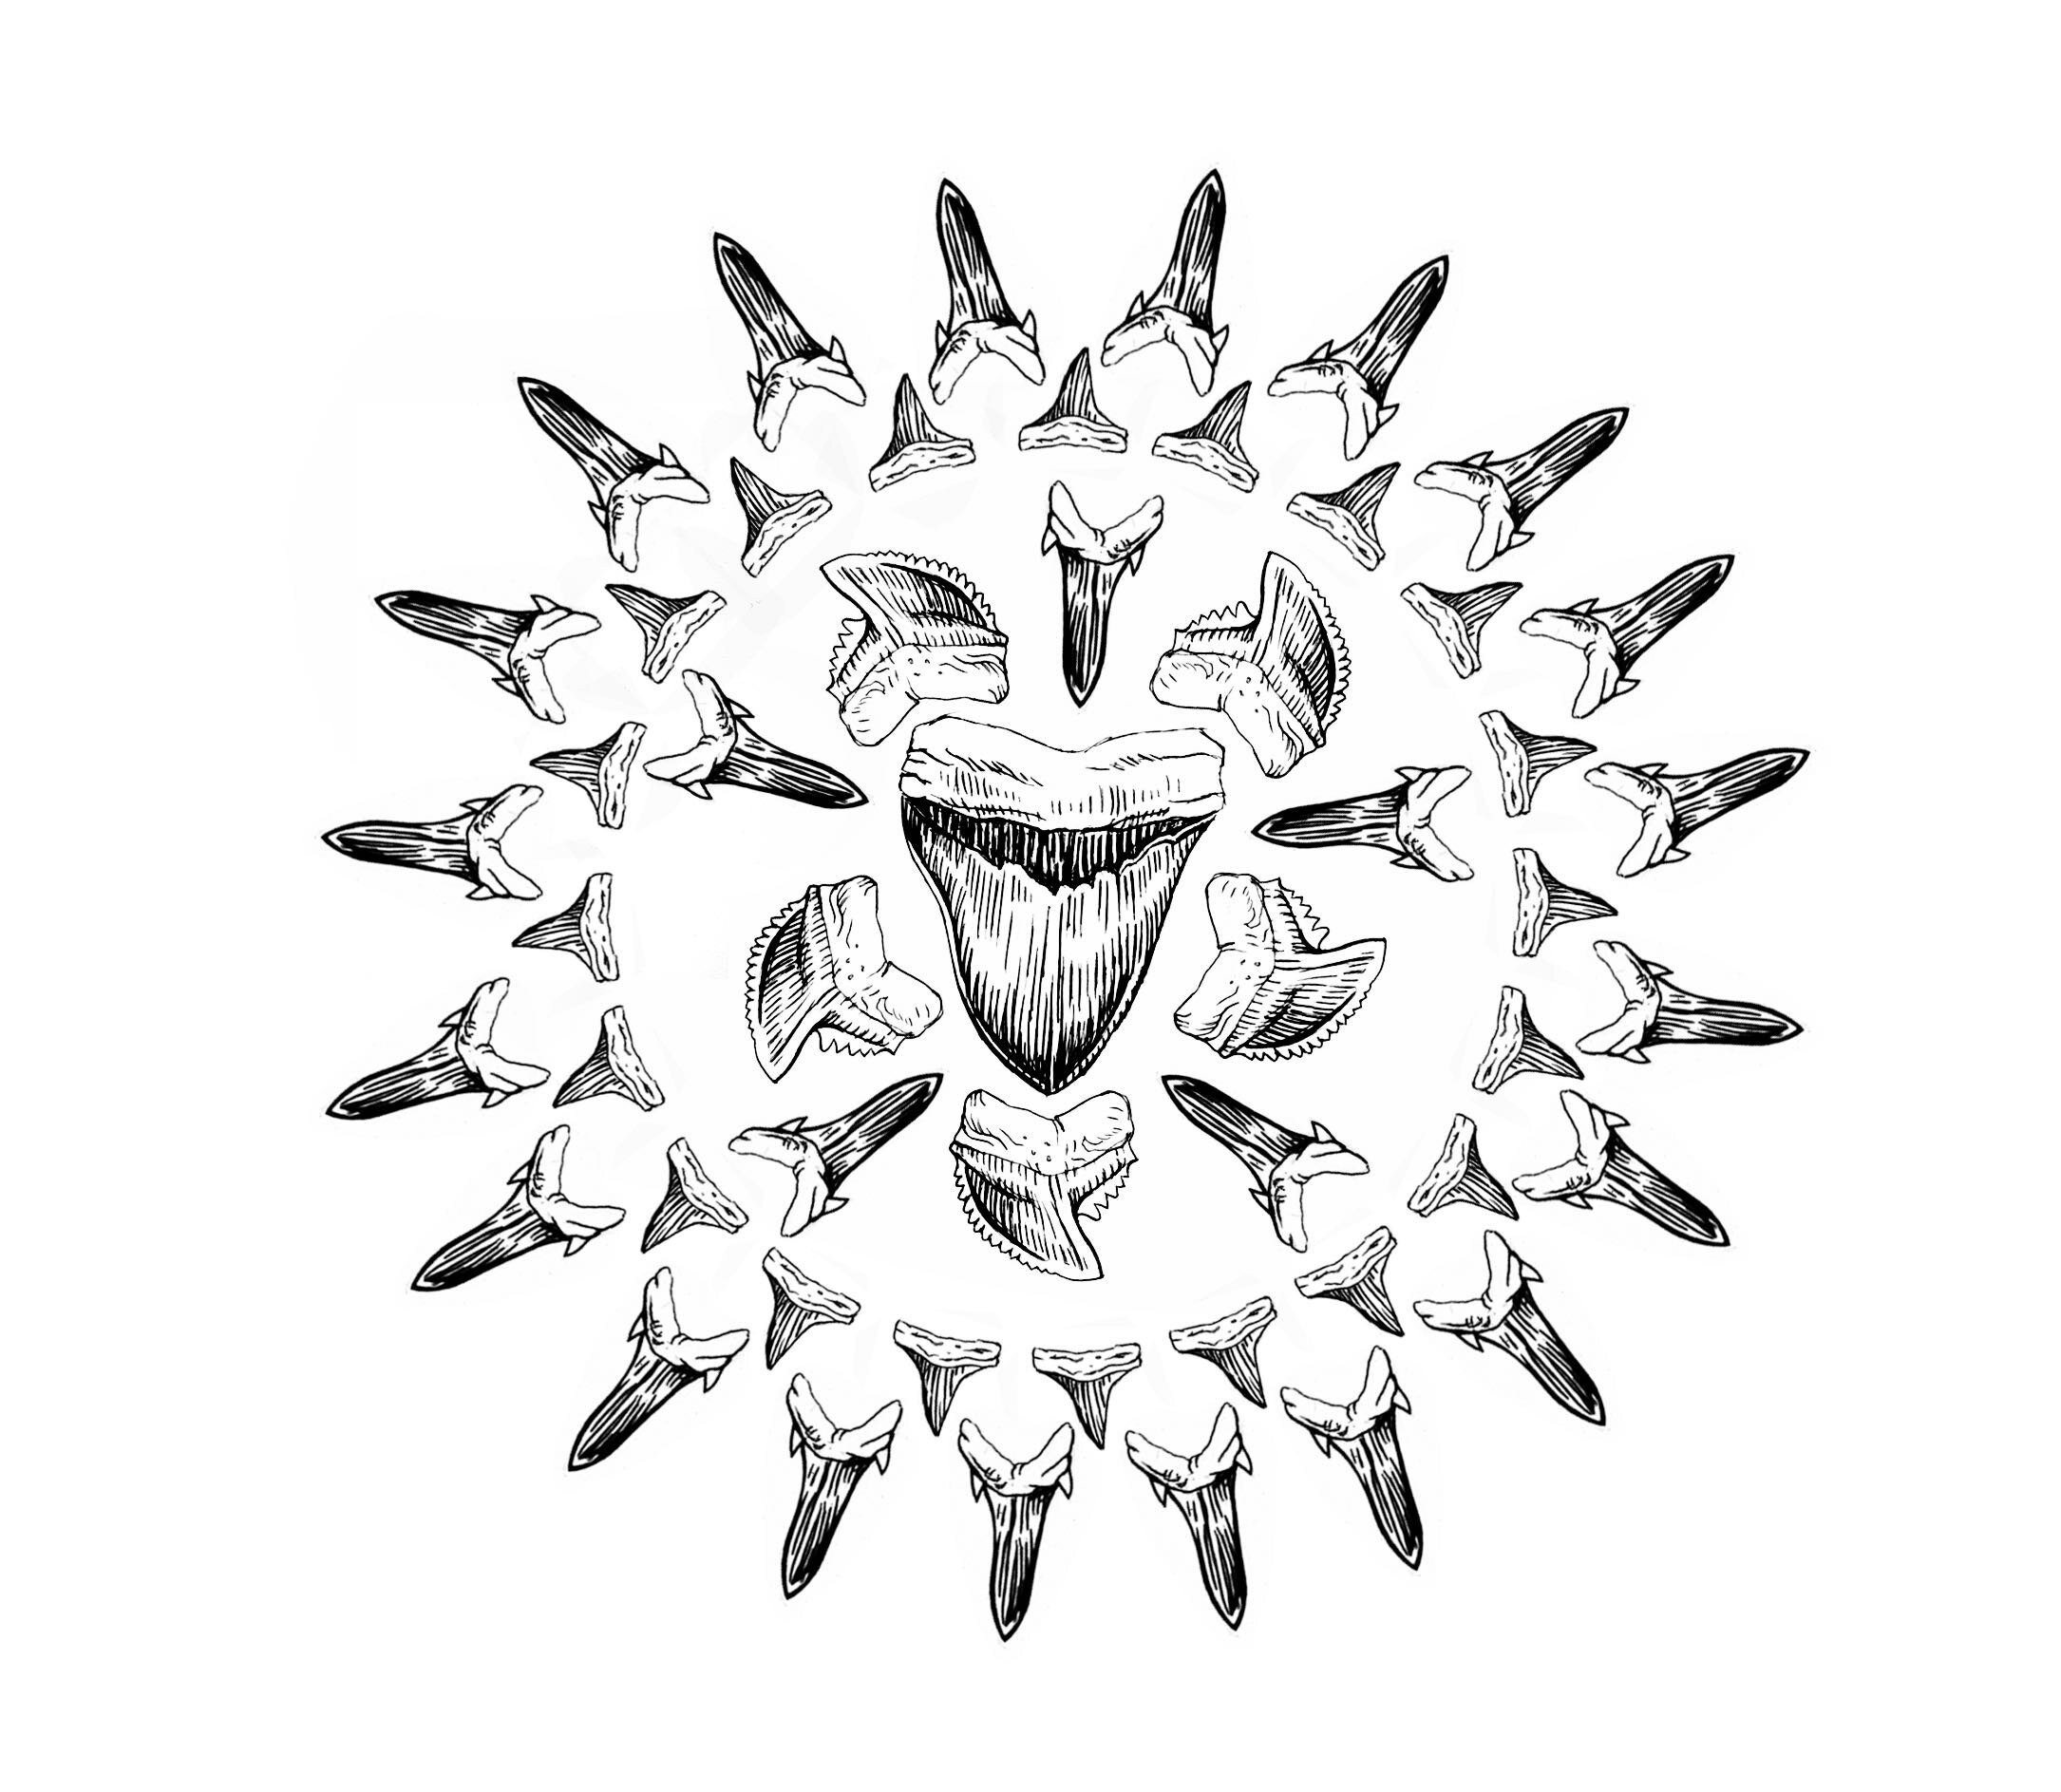  A ballpoint pen drawing of various shark teeth that was scanned and manipulated in Photoshop to create a mandala pattern.   ©KerryChristman 2017  